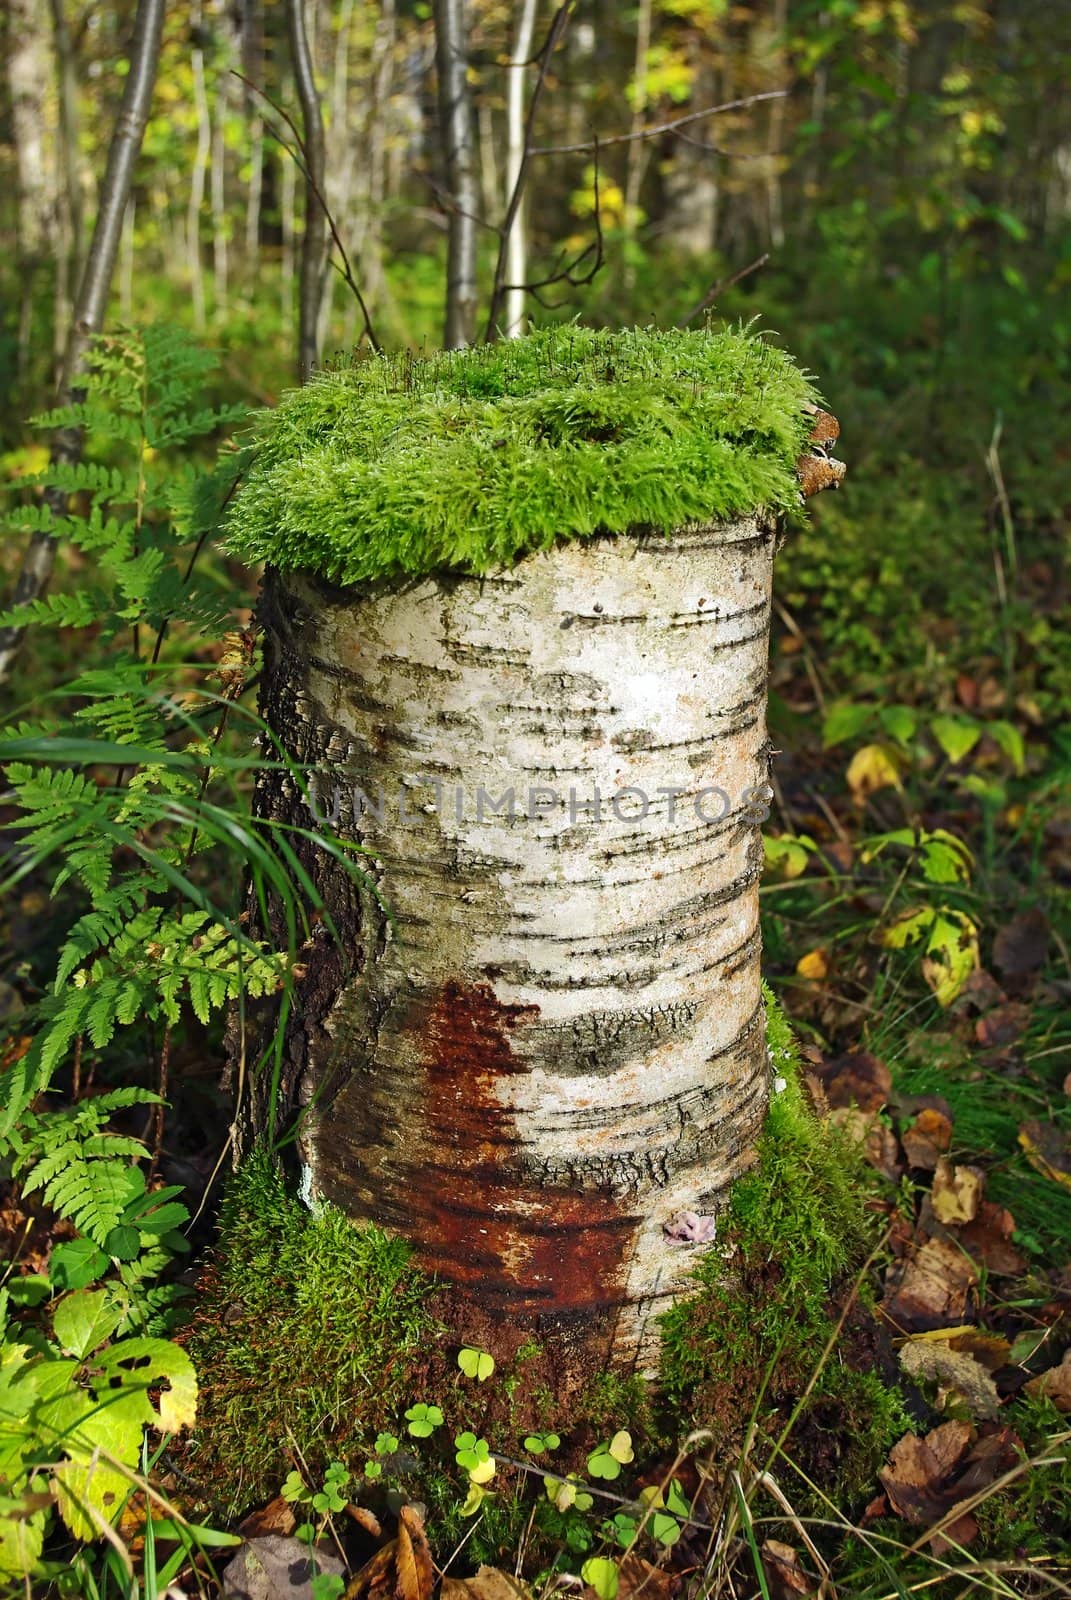 Moss On The Stump by Vitamin